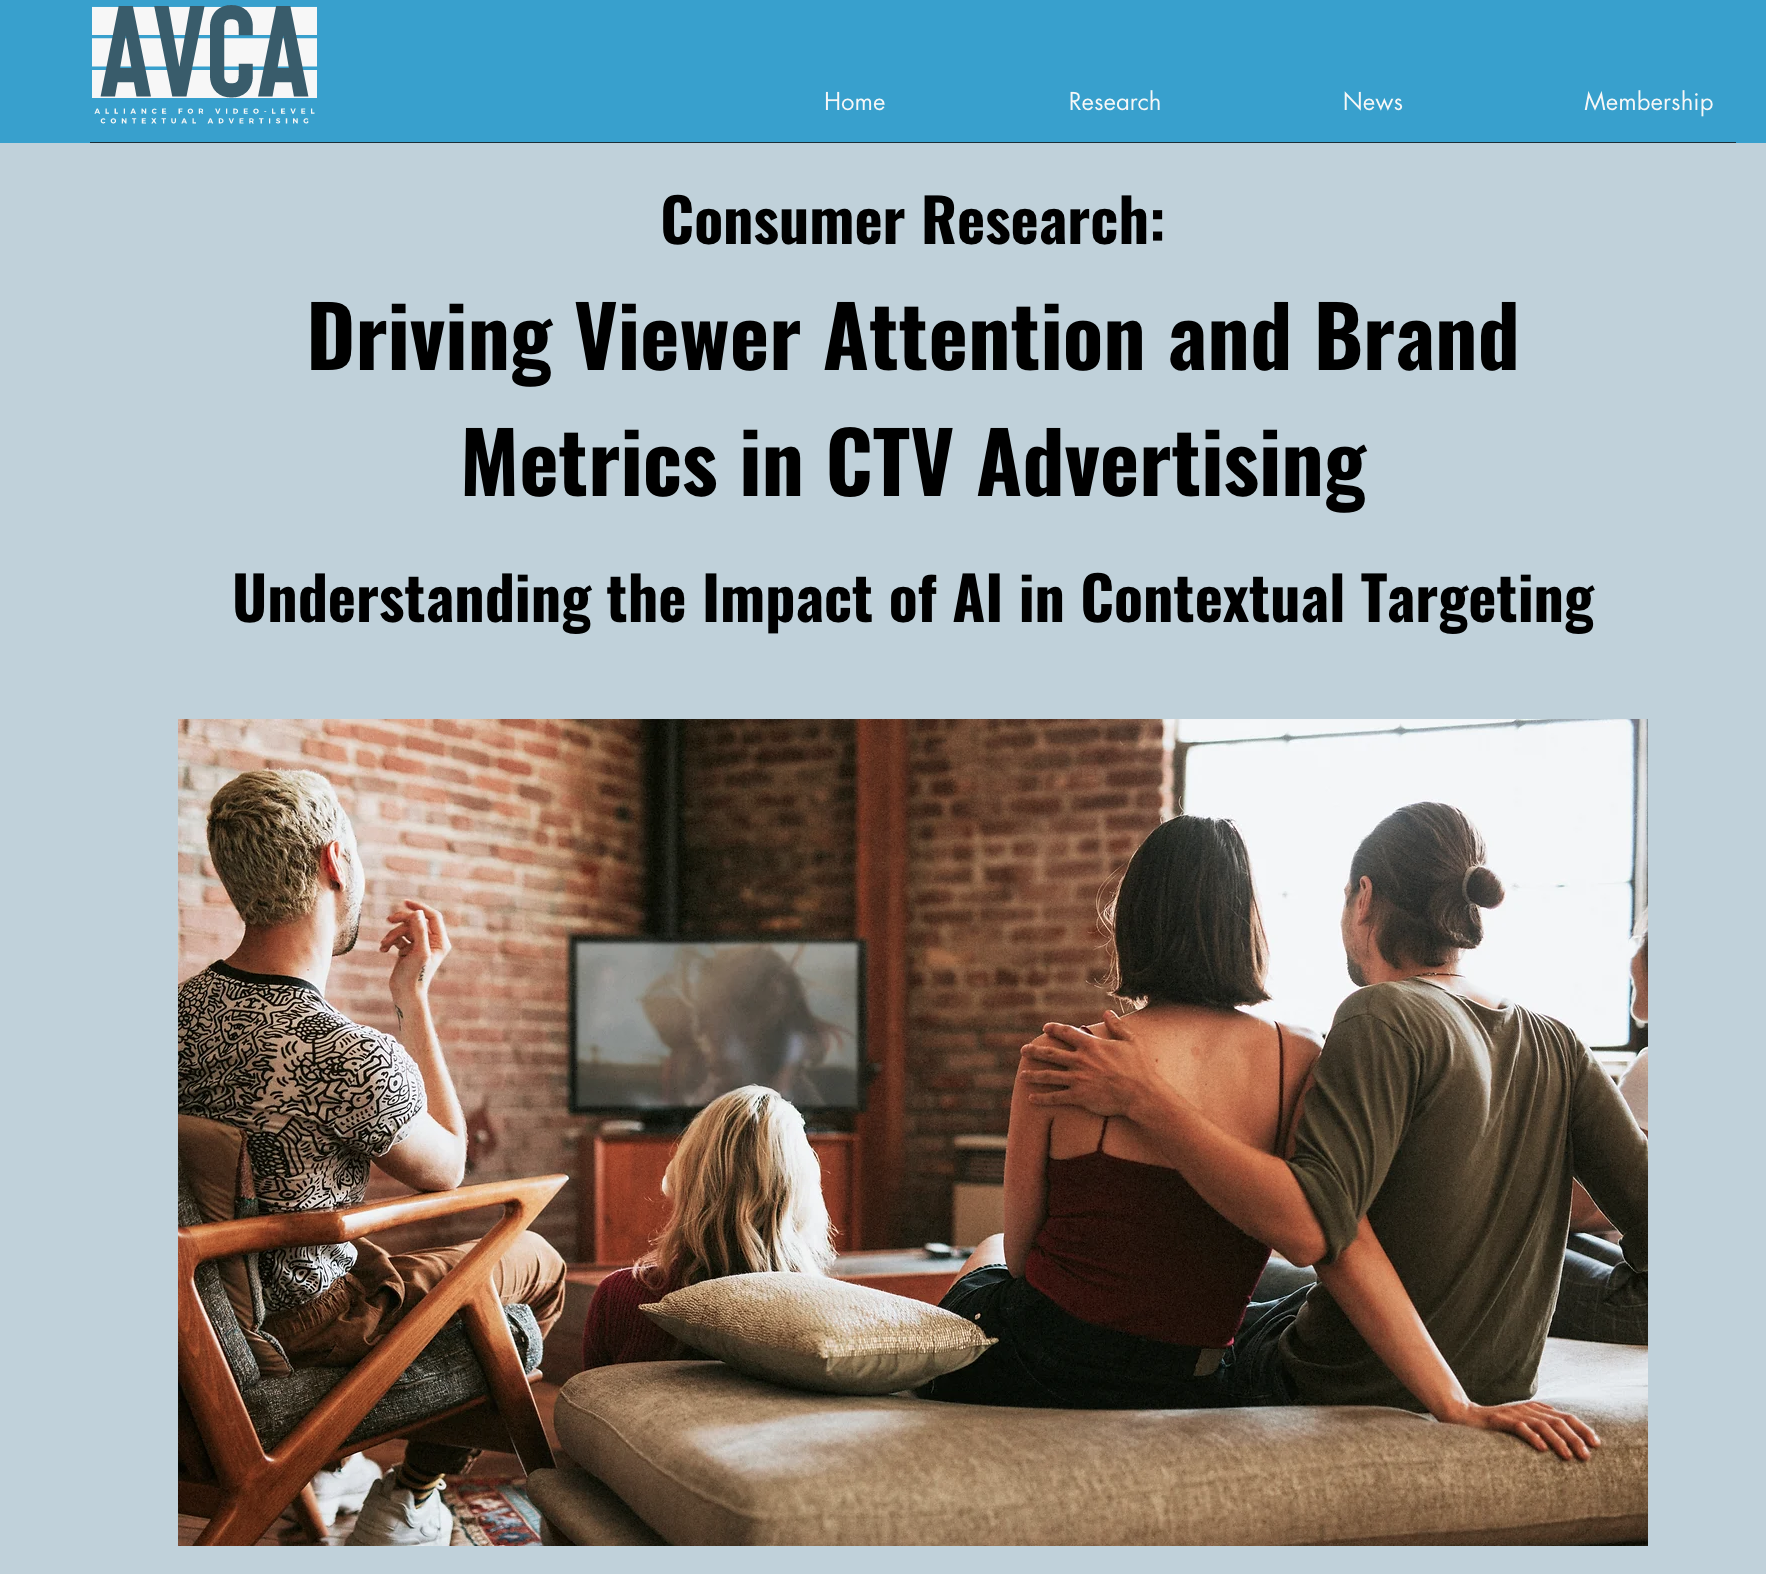 Driving Viewer Attention and Brand Metrics in CTV Advertising